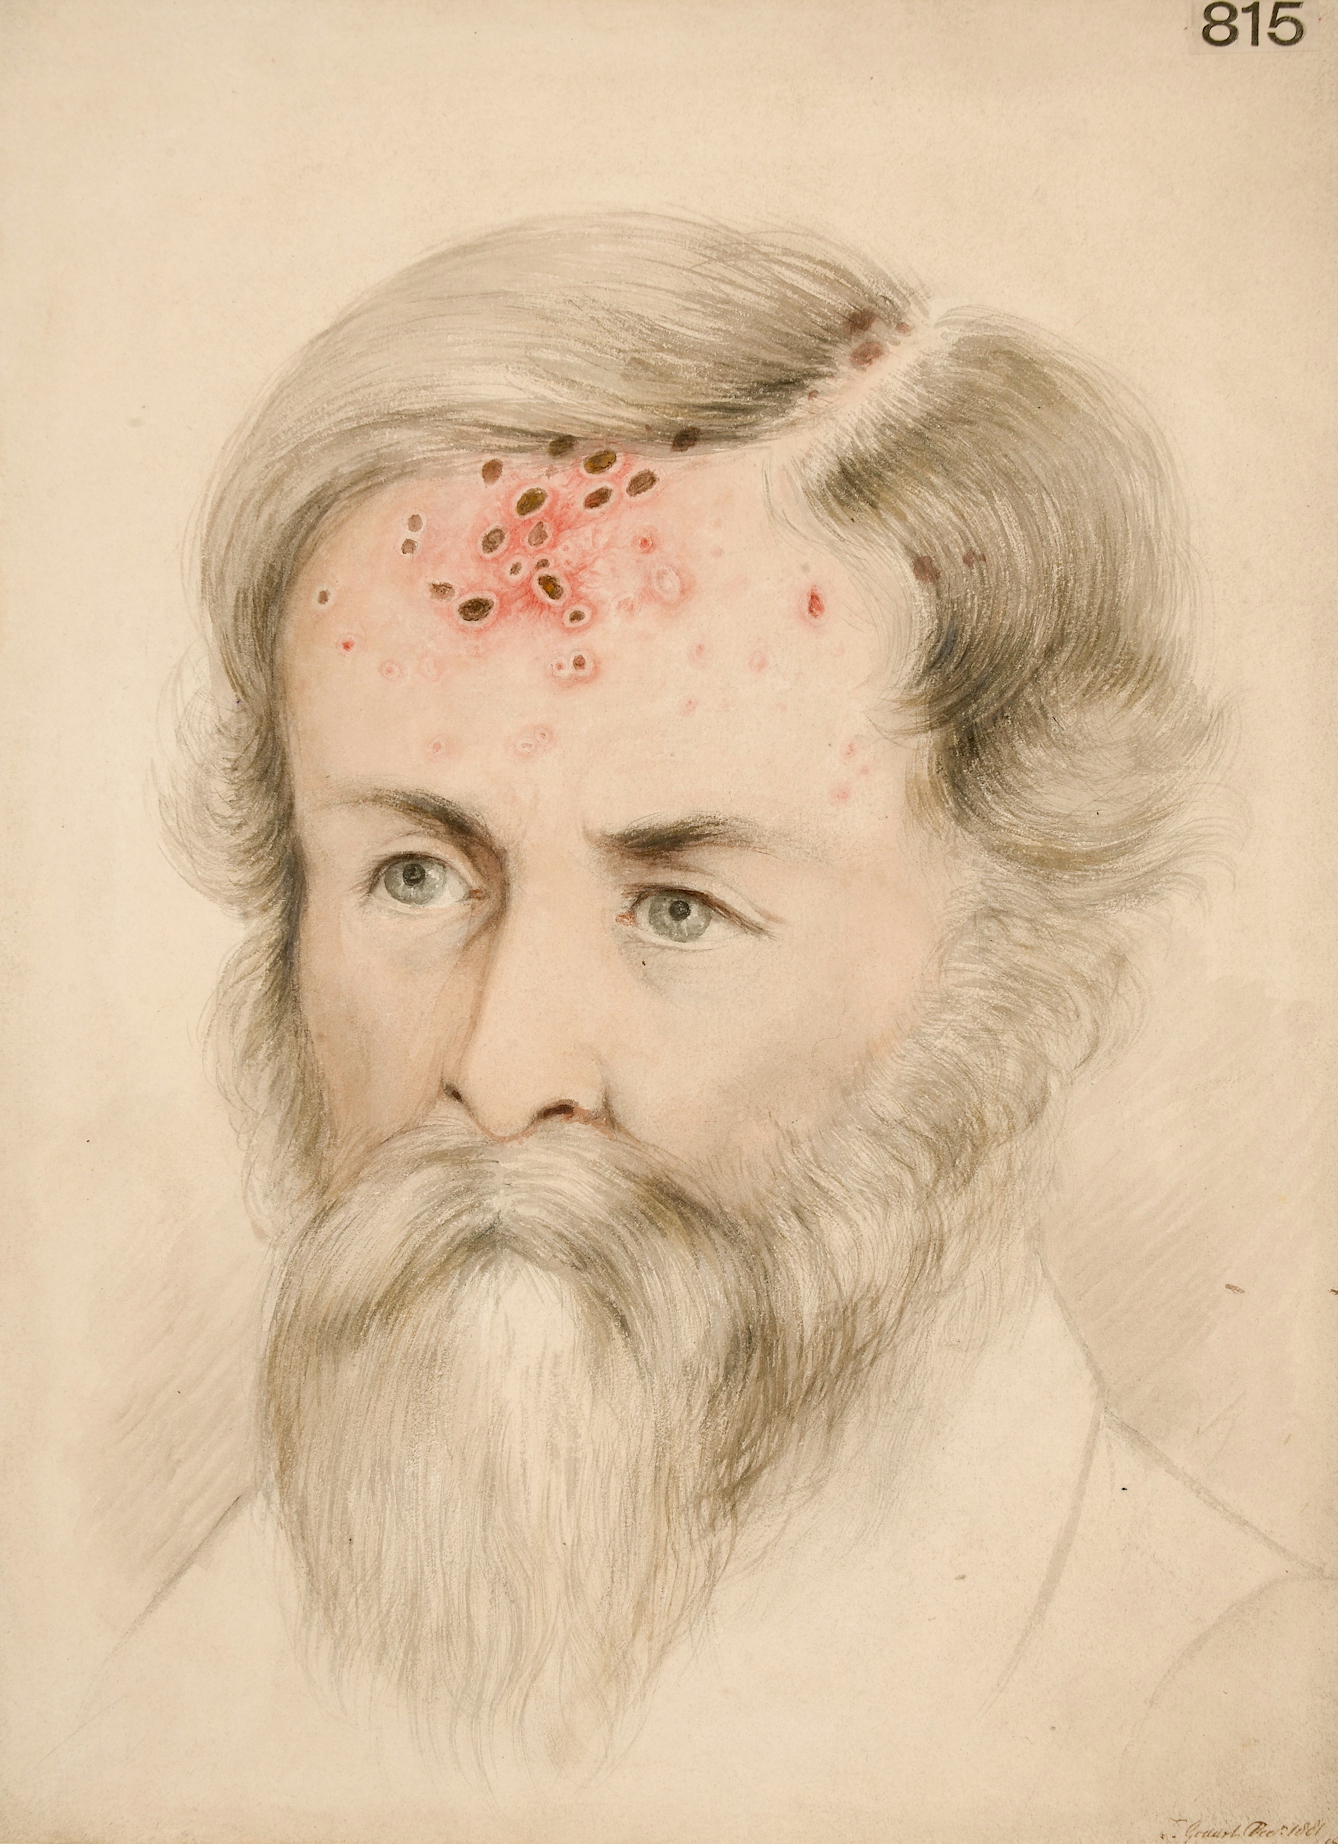 Photograph of an illustration showing the head and shoulders of a man, with red acne marks on his face.